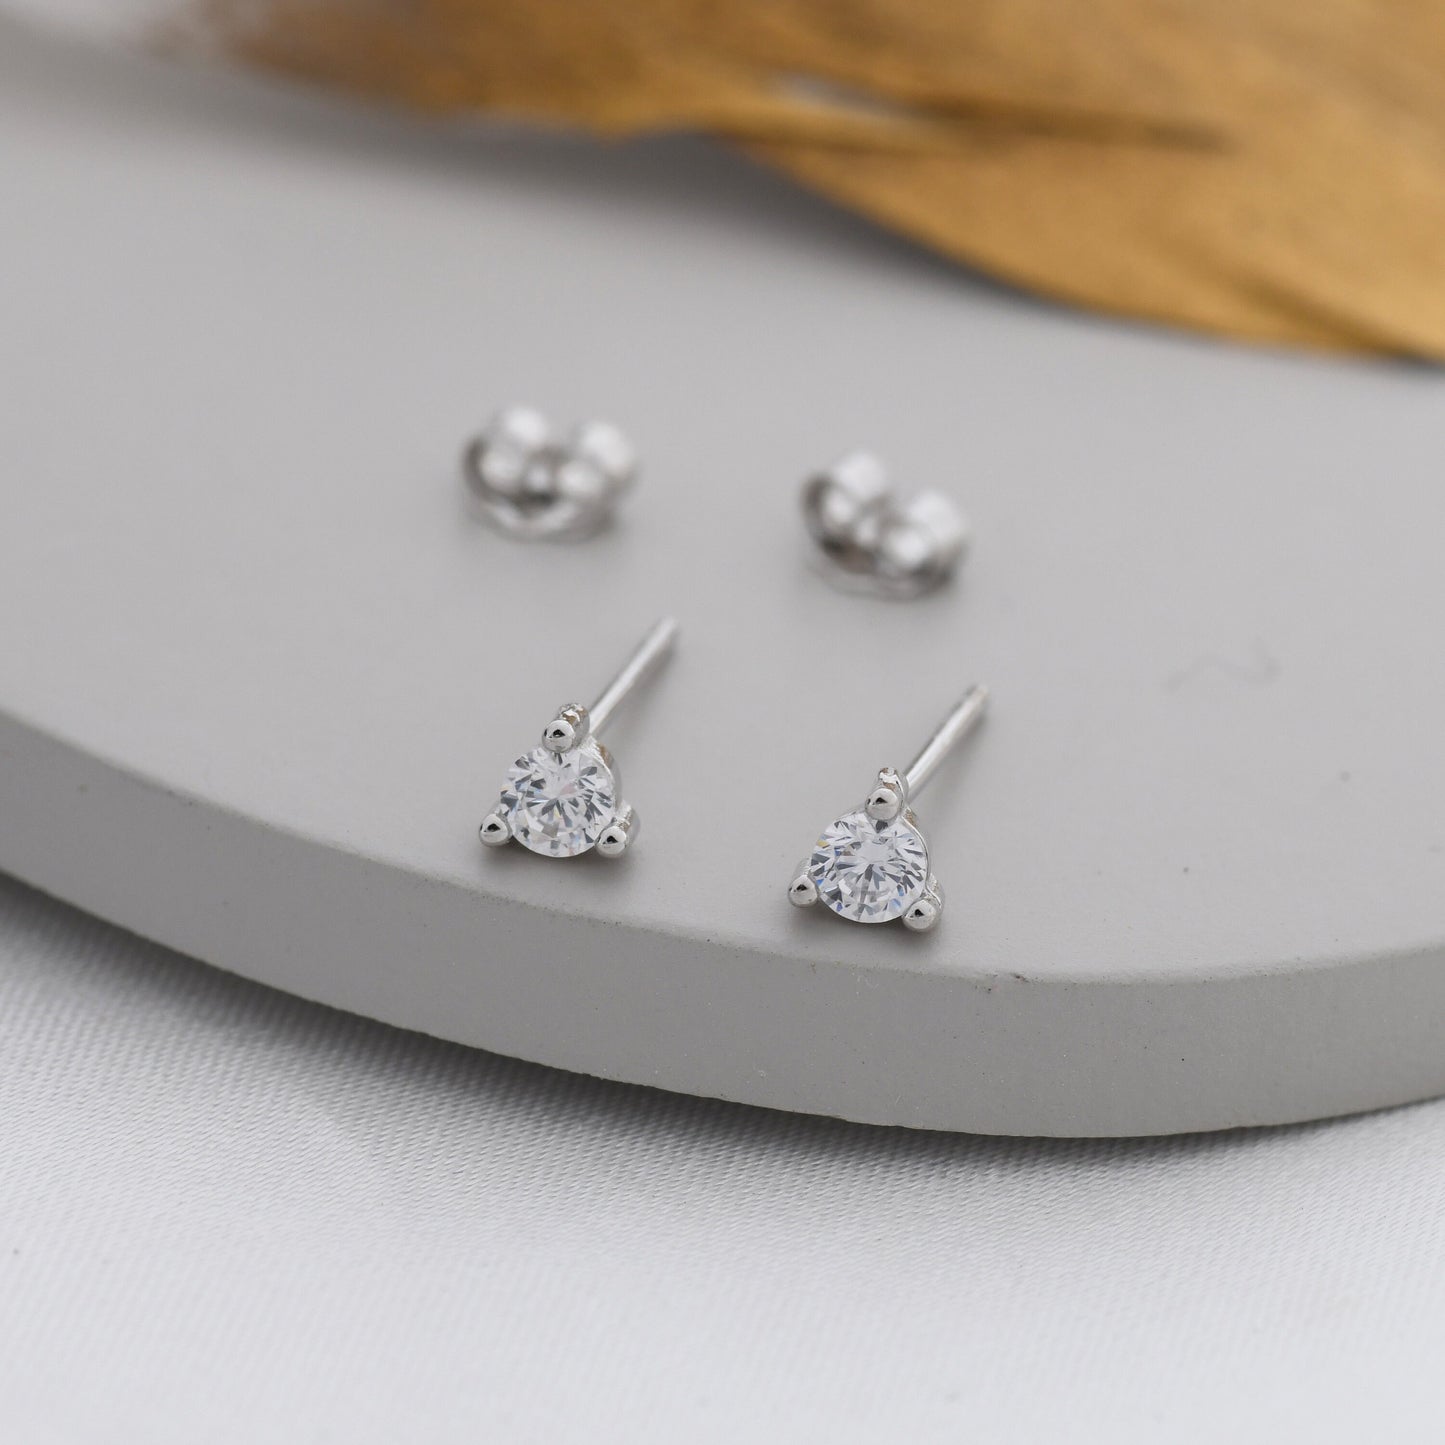 Sterling Silver Diamond CZ Stud Earrings,  3mm April Birthstone CZ Earrings, Three Prong, Silver, Gold or Rose Gold, Stacking Earrings